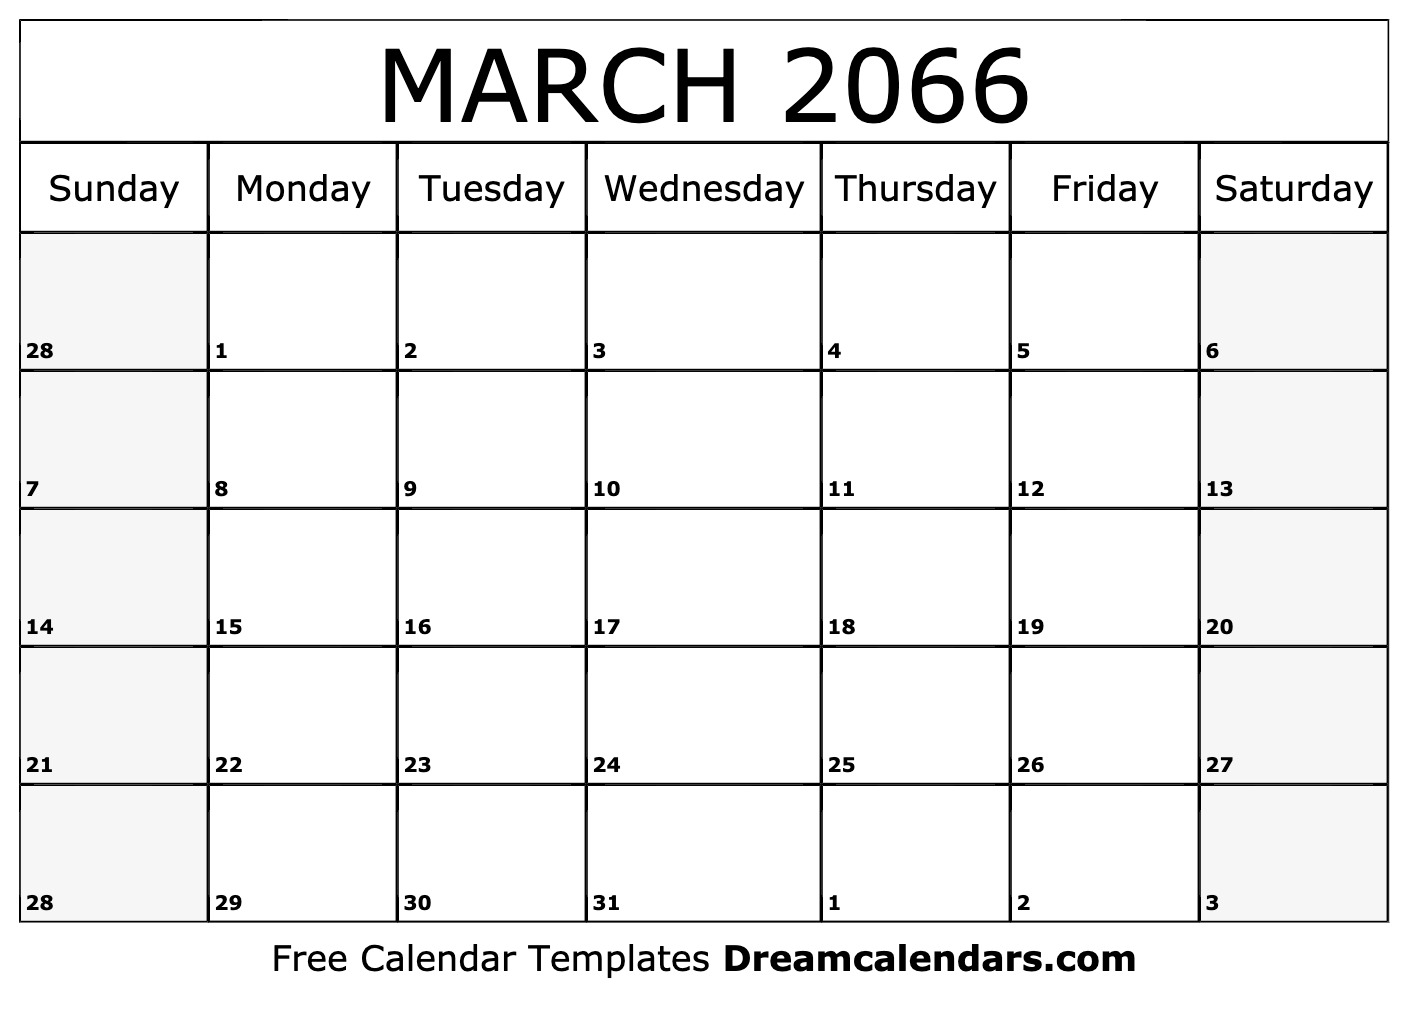 march-2066-calendar-free-blank-printable-with-holidays